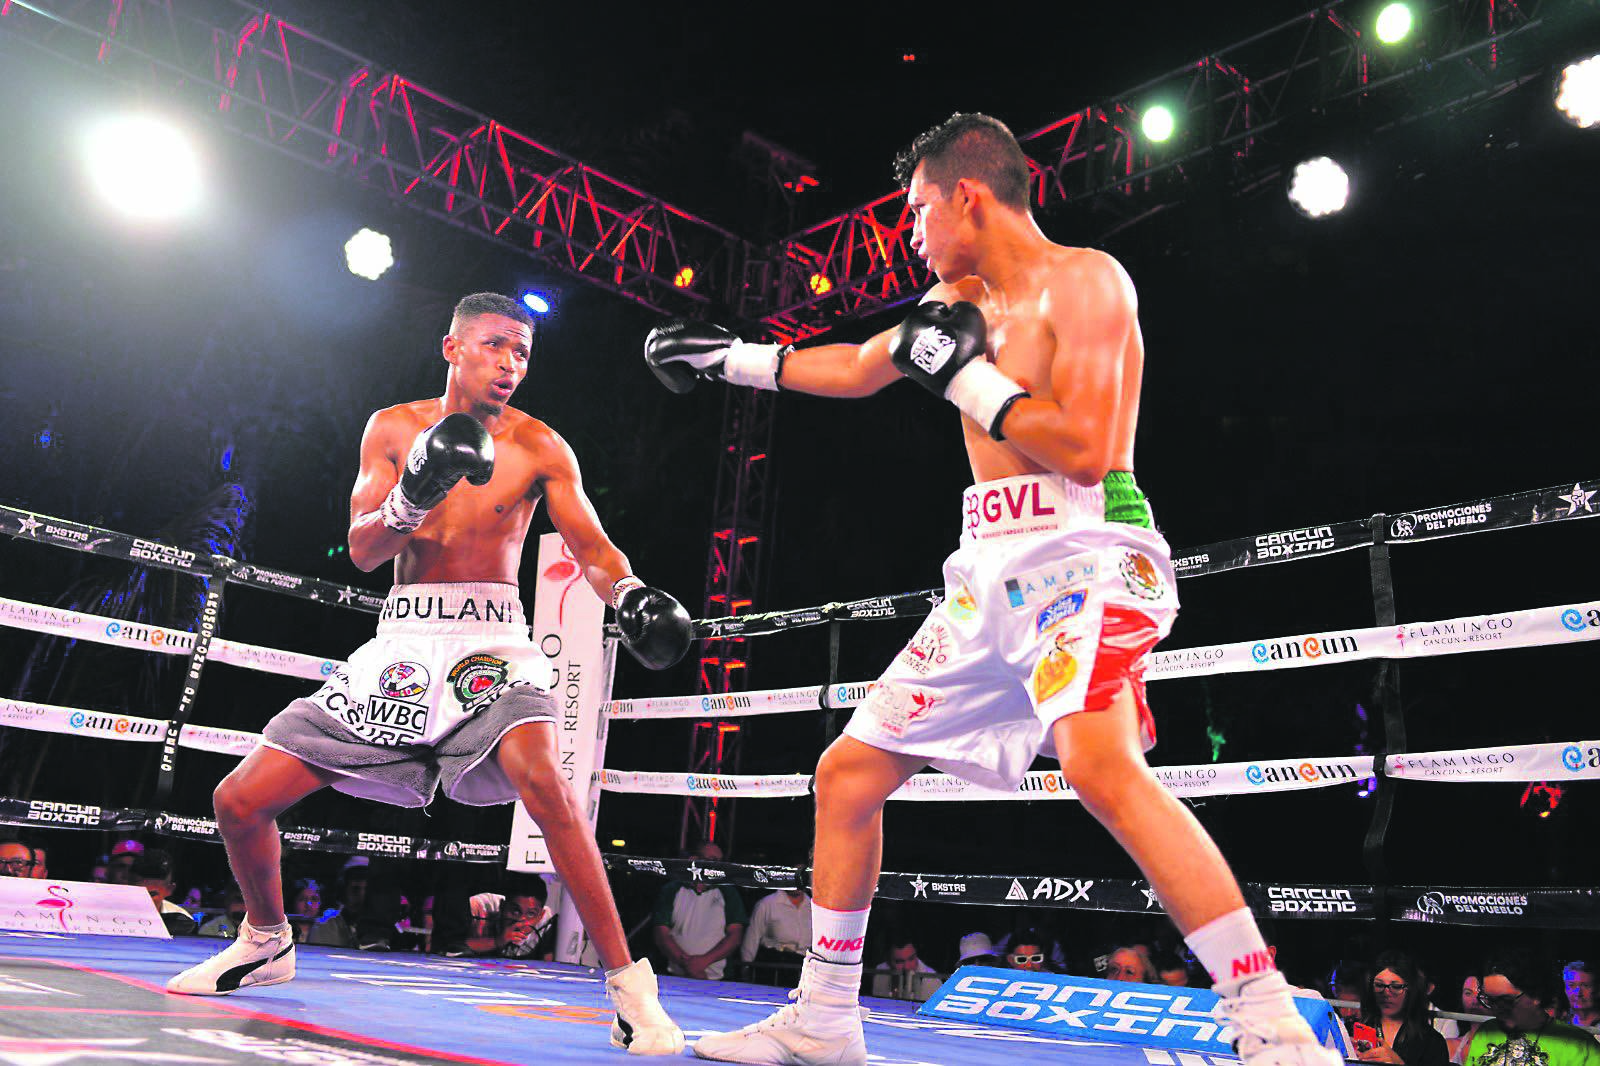 Ayanda Ndulani during his WBC elimination bout against Luis Castillo in Mexico a fortnight ago. Photo: Bxstrs Promotions / Twitter